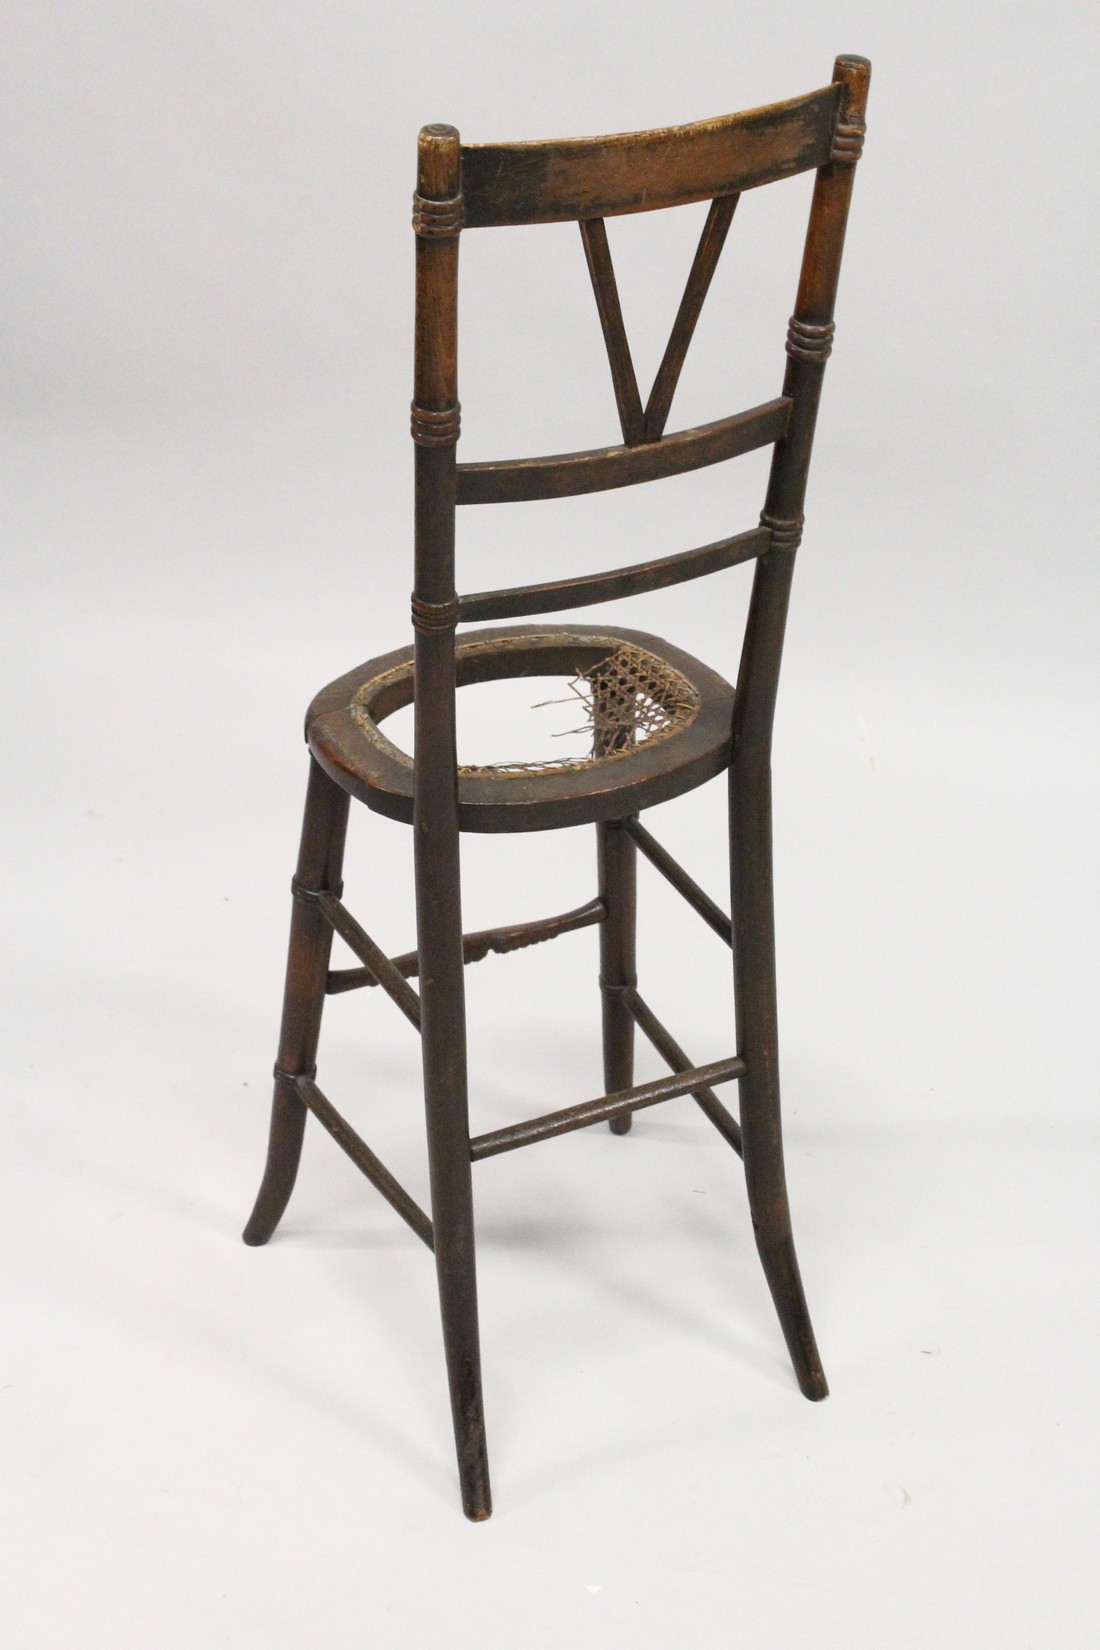 A 19TH CENTURY BEECH FRAMED AND CANE WORK SEATED CORRECTION CHAIR (SEAT A. F.). 3ft 2ins high - Image 2 of 2